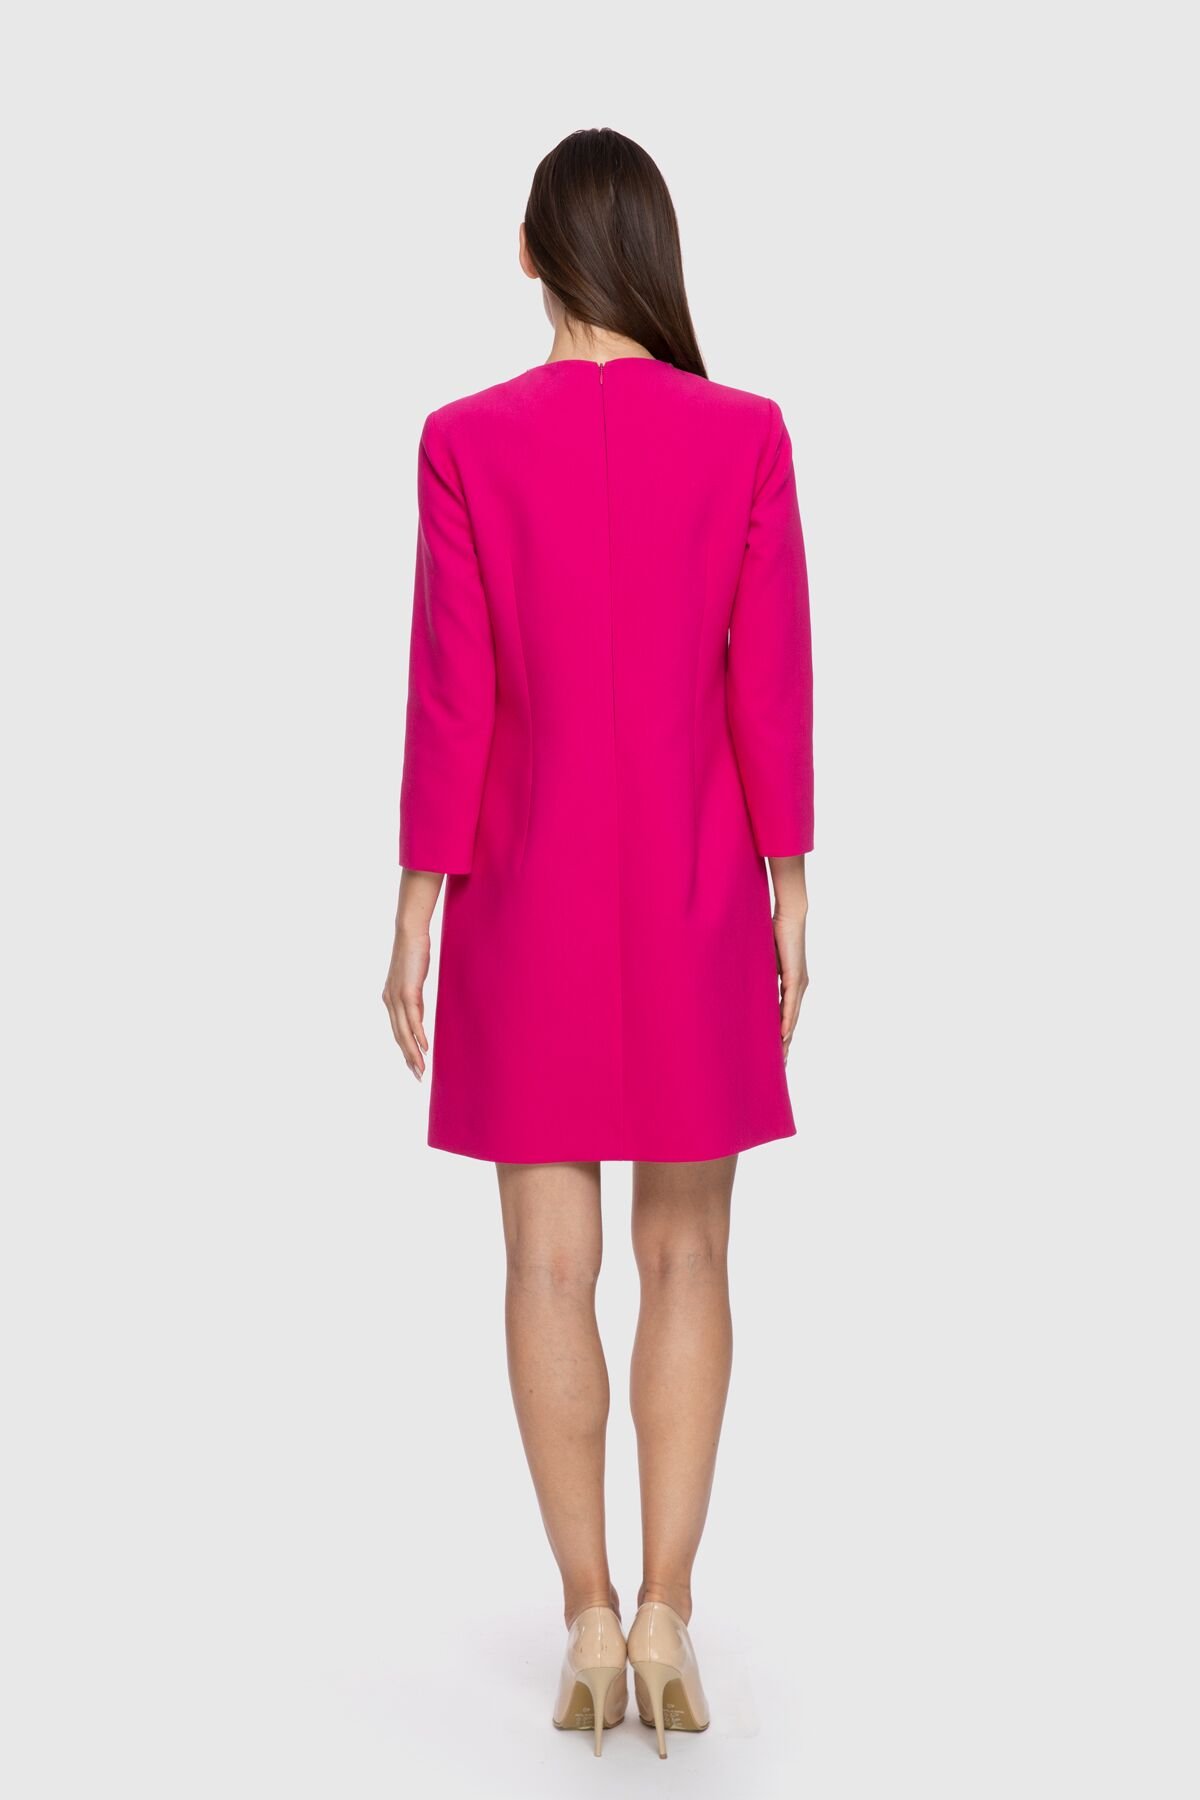 Embroidered Collar Front Pleat Piece Mini Pink Dress